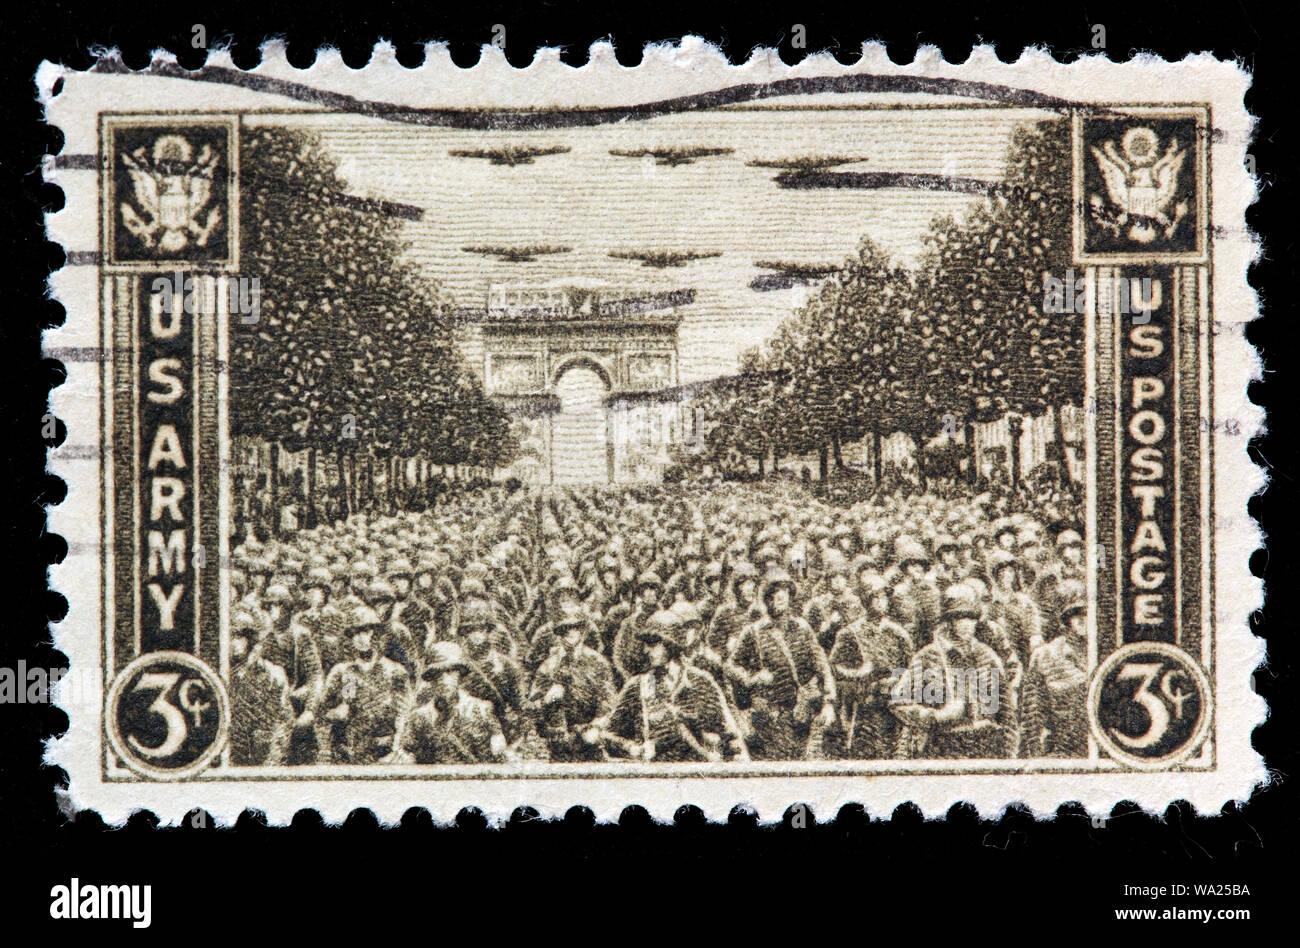 US Army, Troops Passing the Arch of Triumph, Paris, postage stamp, USA, 1945 Stock Photo